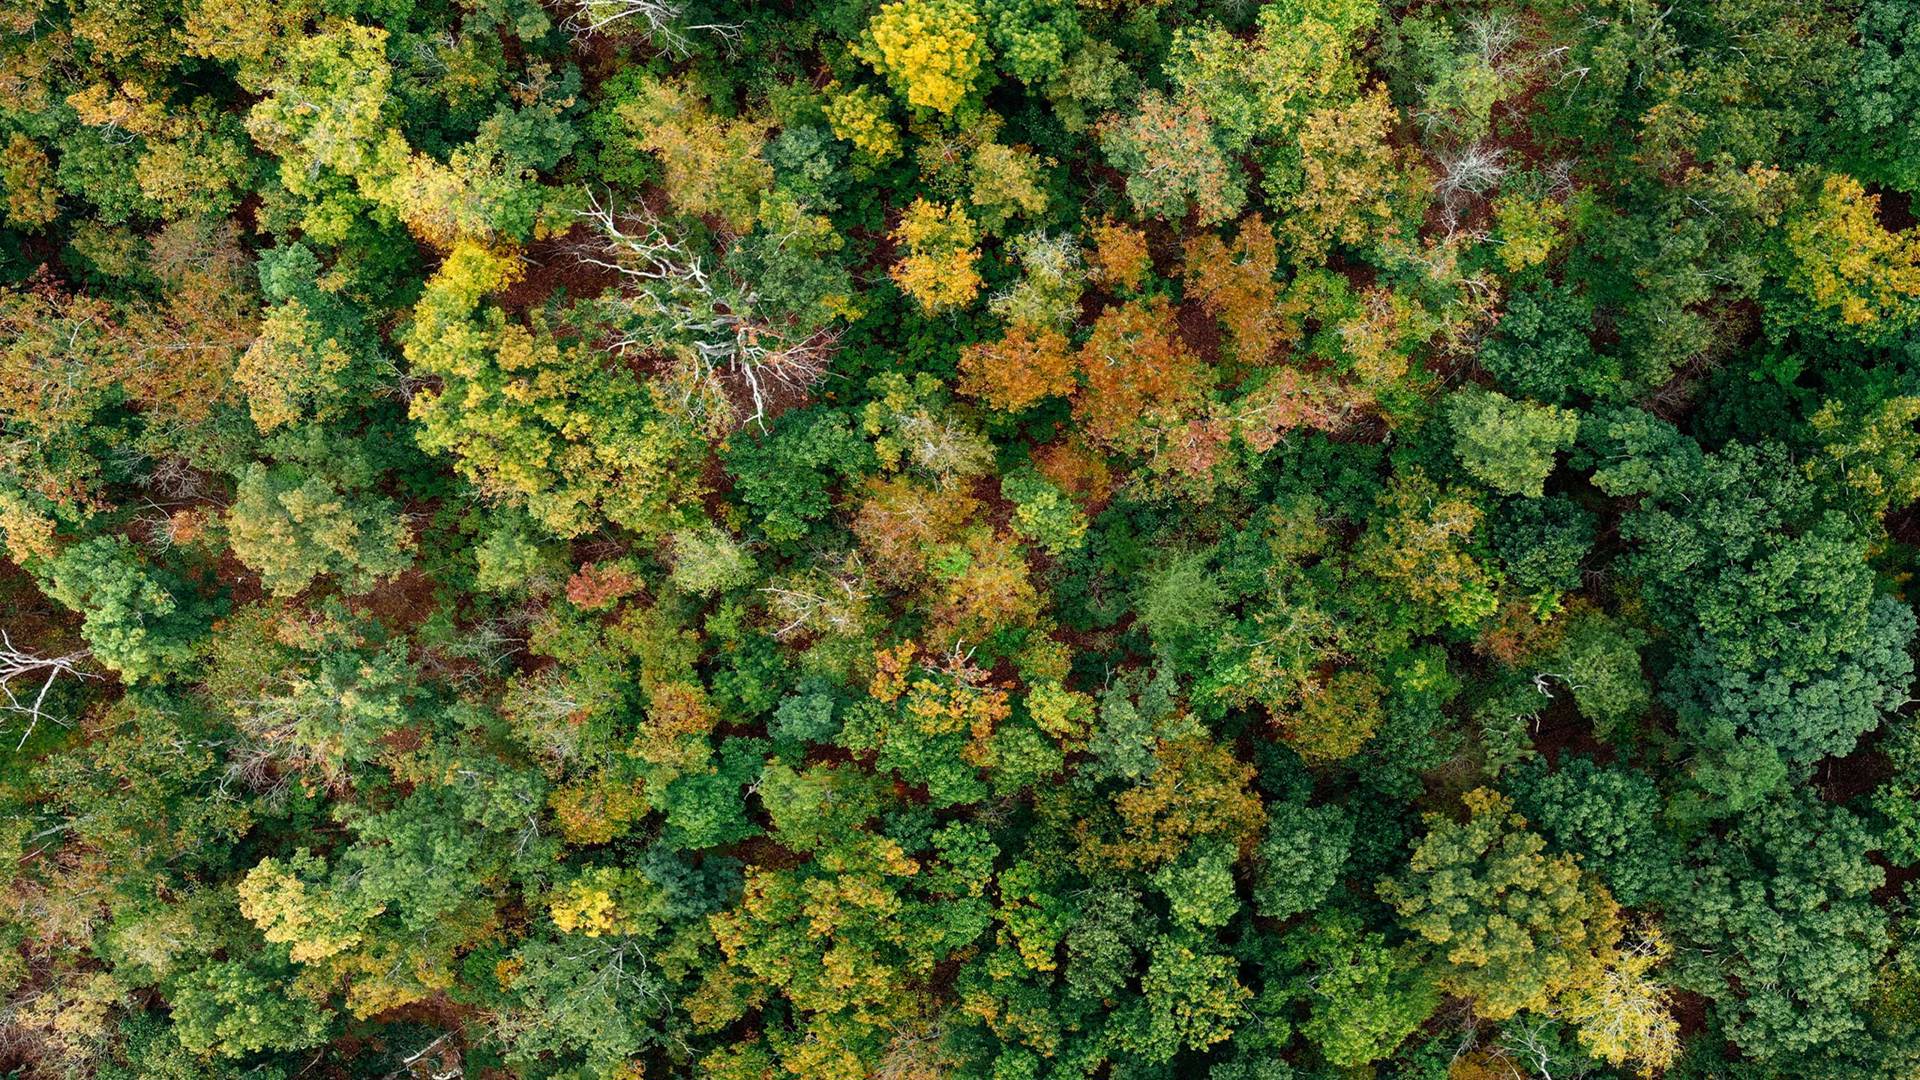 Top-down view of a forest in early autumn